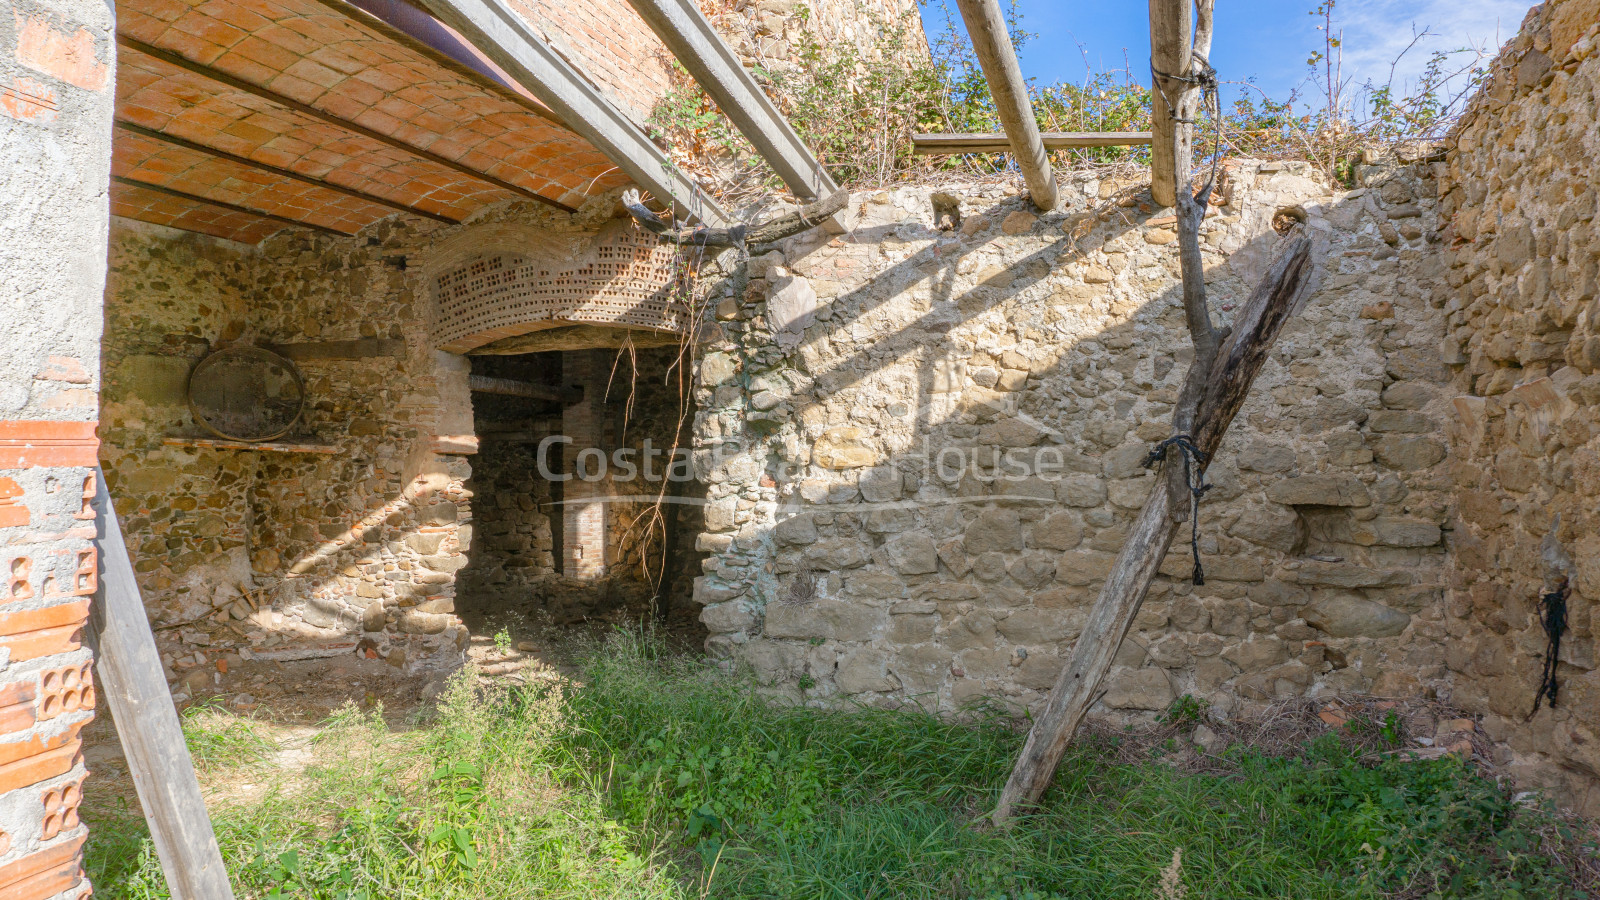 Catalan country house to refurbish for sale in Corçà, with 37.000 m² of land